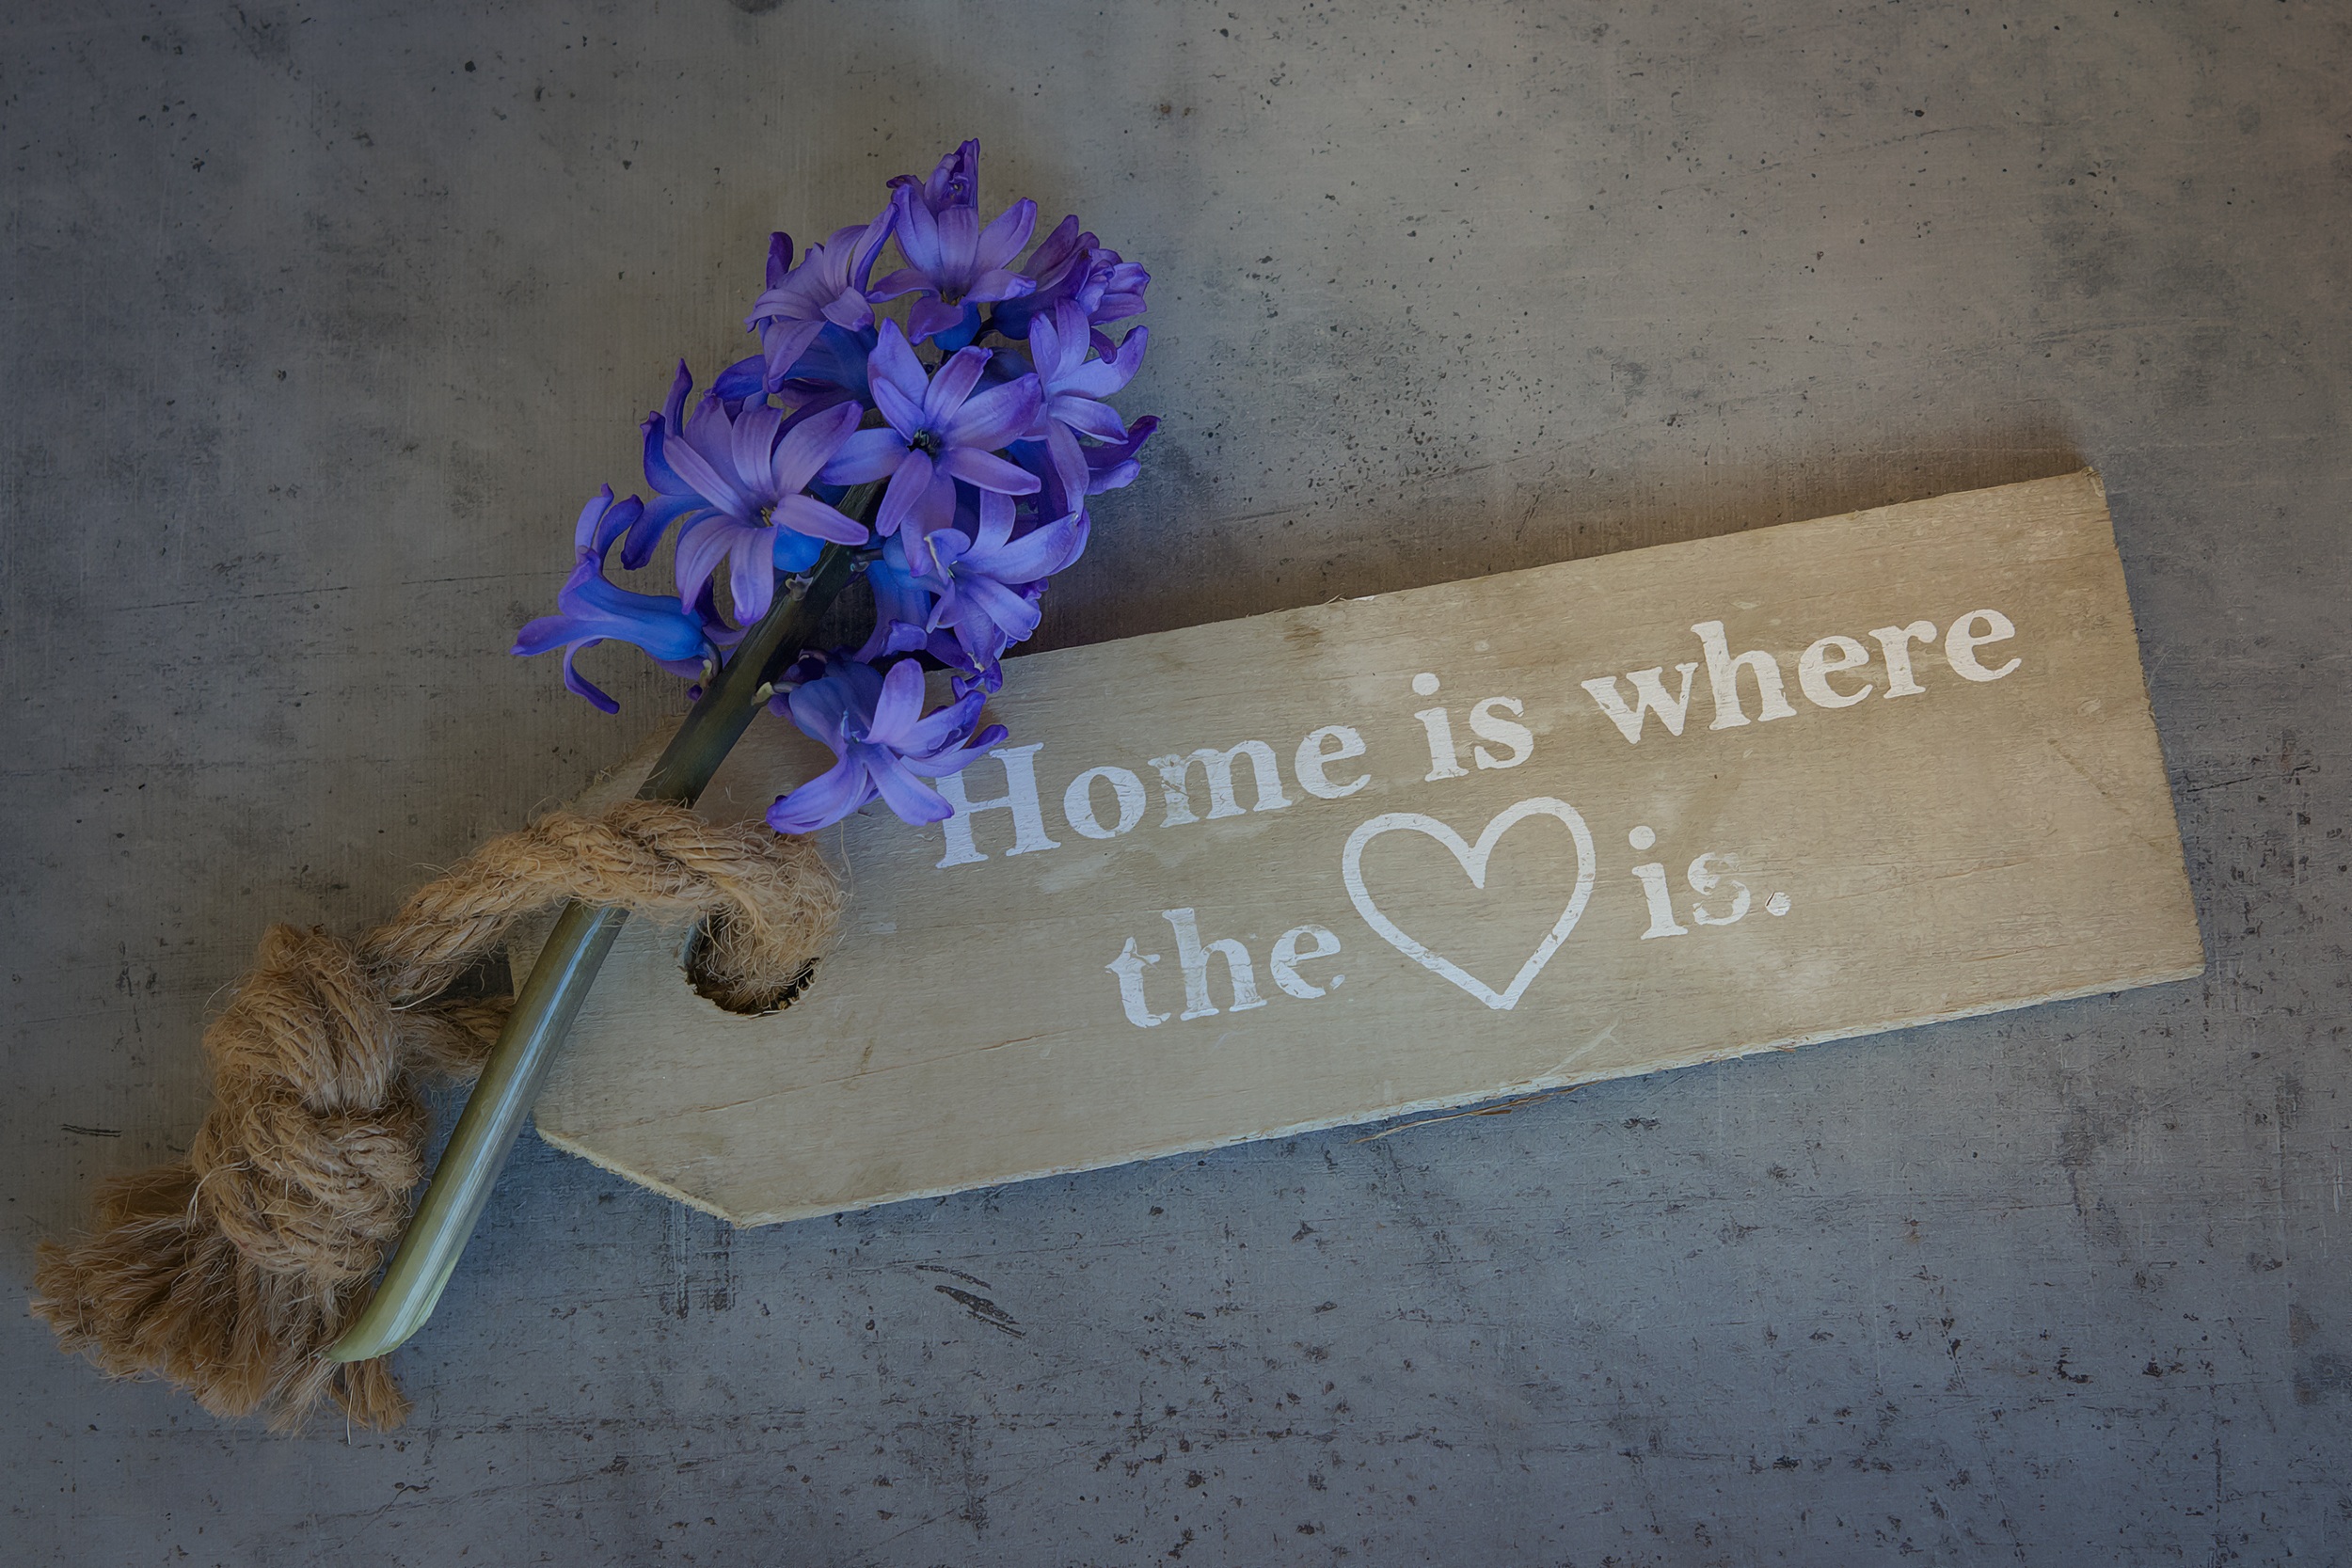 Home is where the heart is. by Pezibear